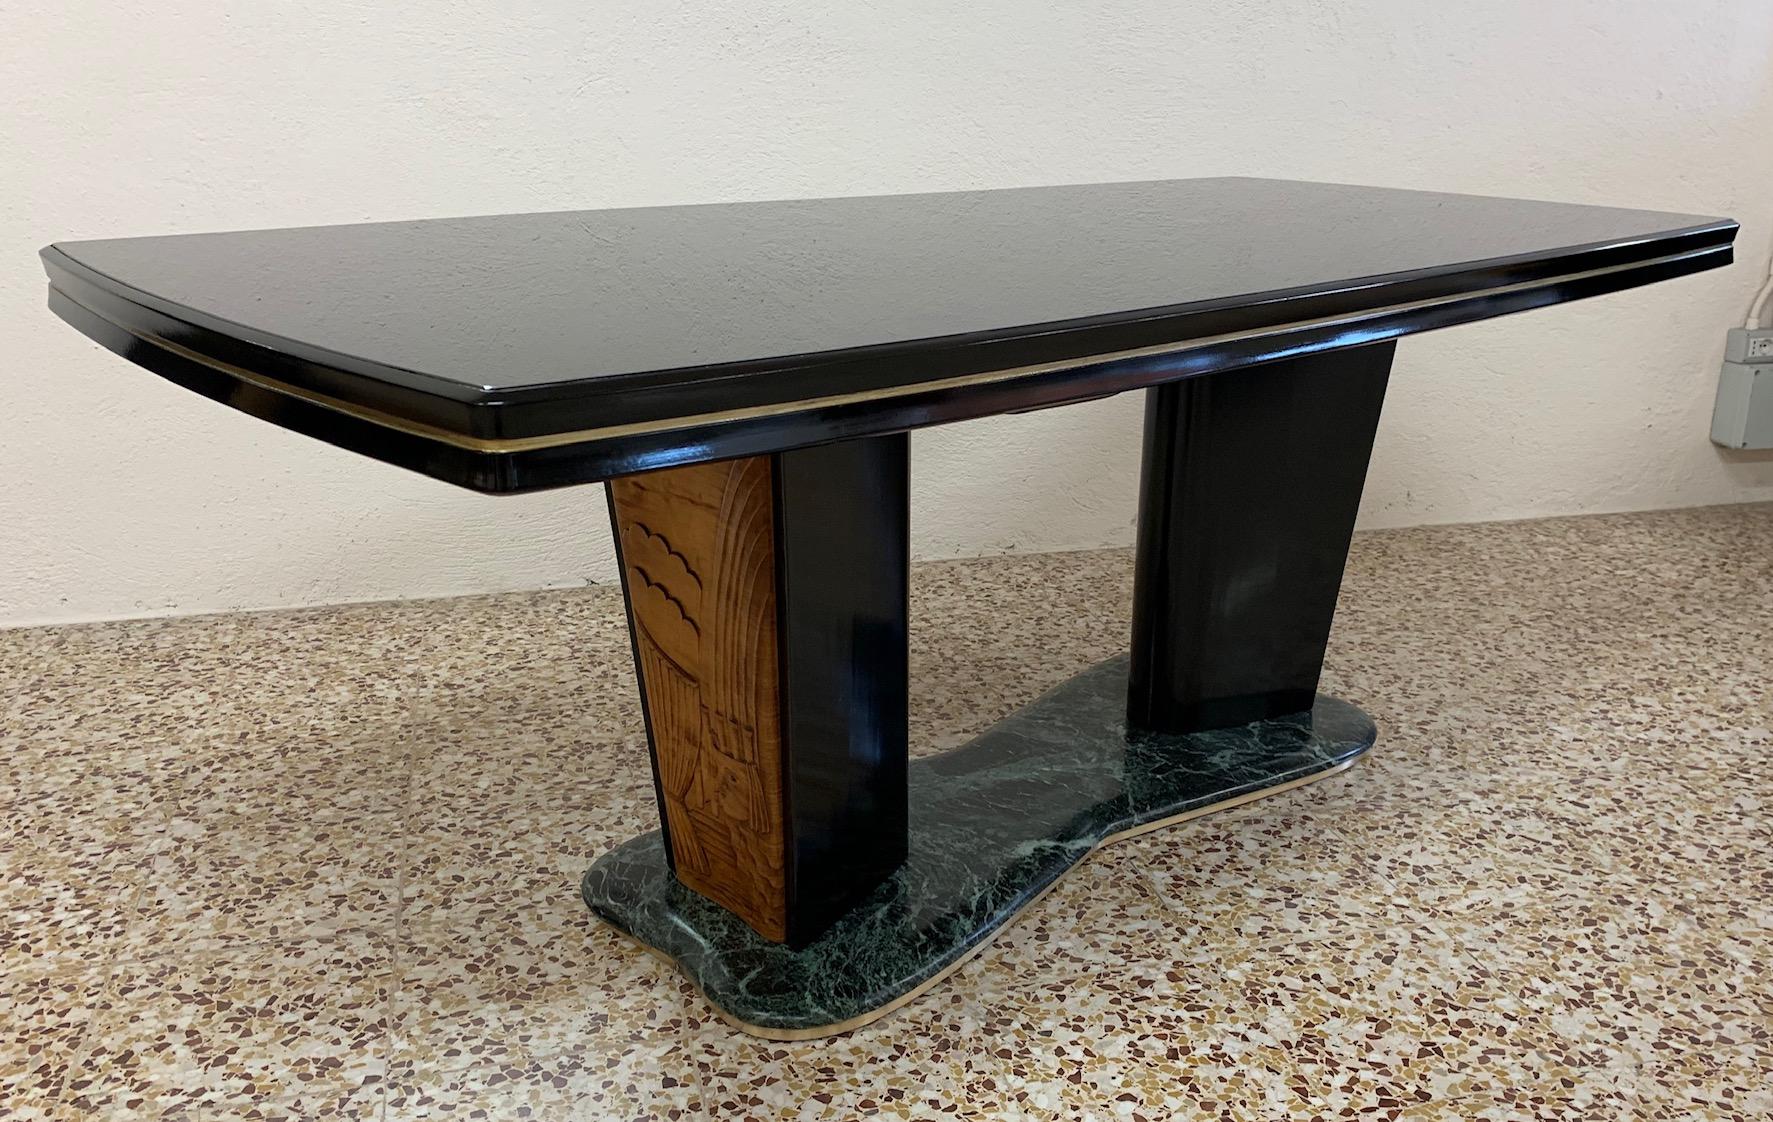 This table was made in Italy by Vittorio Dassi Lissone.
The top is black glass with the edge in black solid wood with a golden profile.
The base is formed by two large black lacquered legs with two finely carved maple panels all supported by a